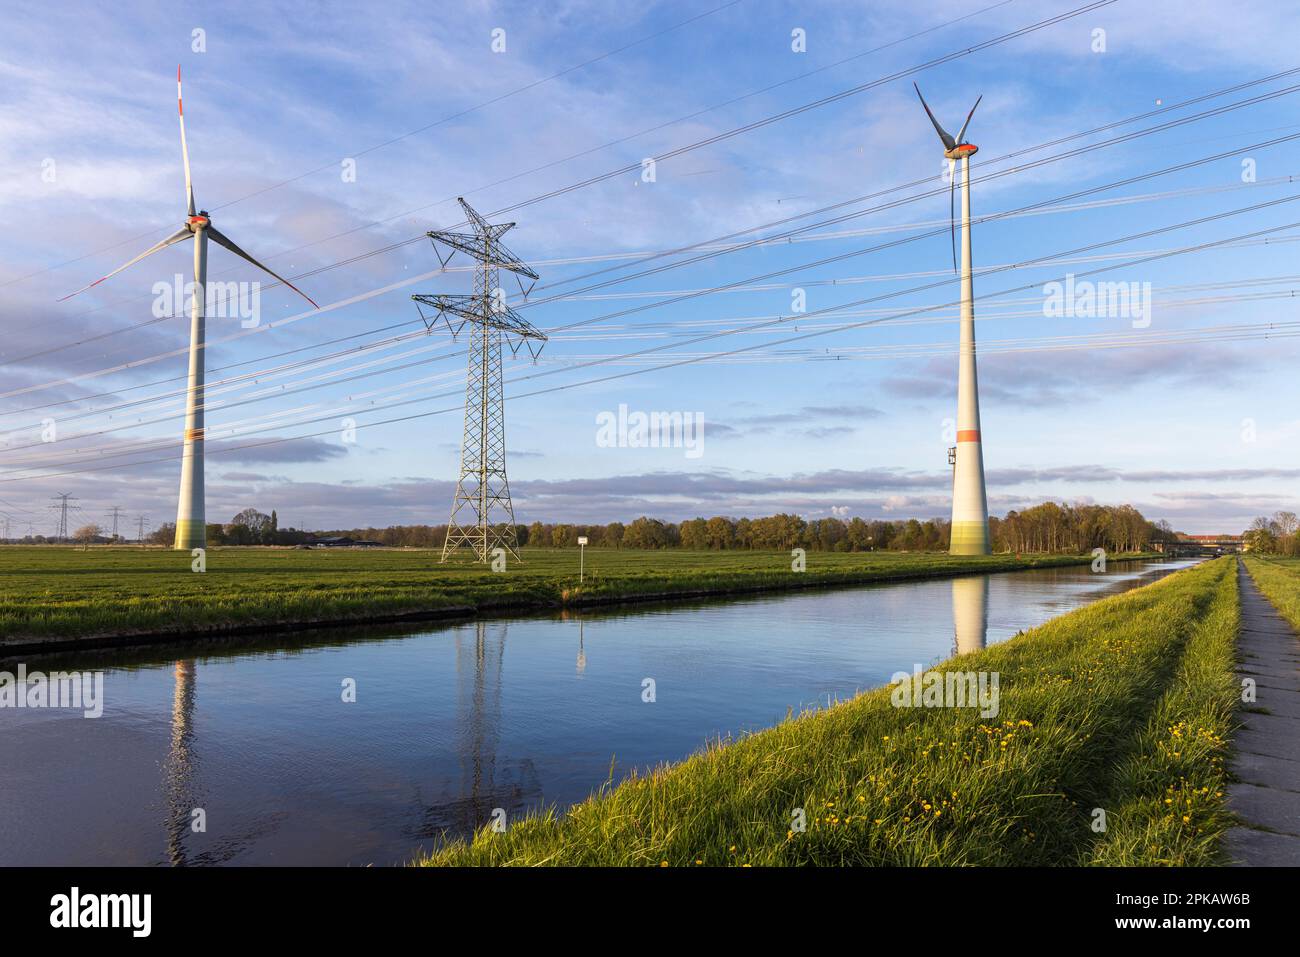 Overhead line, wind turbine on the Ems-Jade Canal, owned by Friesen-Elektra II GmbH & Co. KG, in Sande, municipality in the district of Friesland, Lower Saxony, Germany Stock Photo